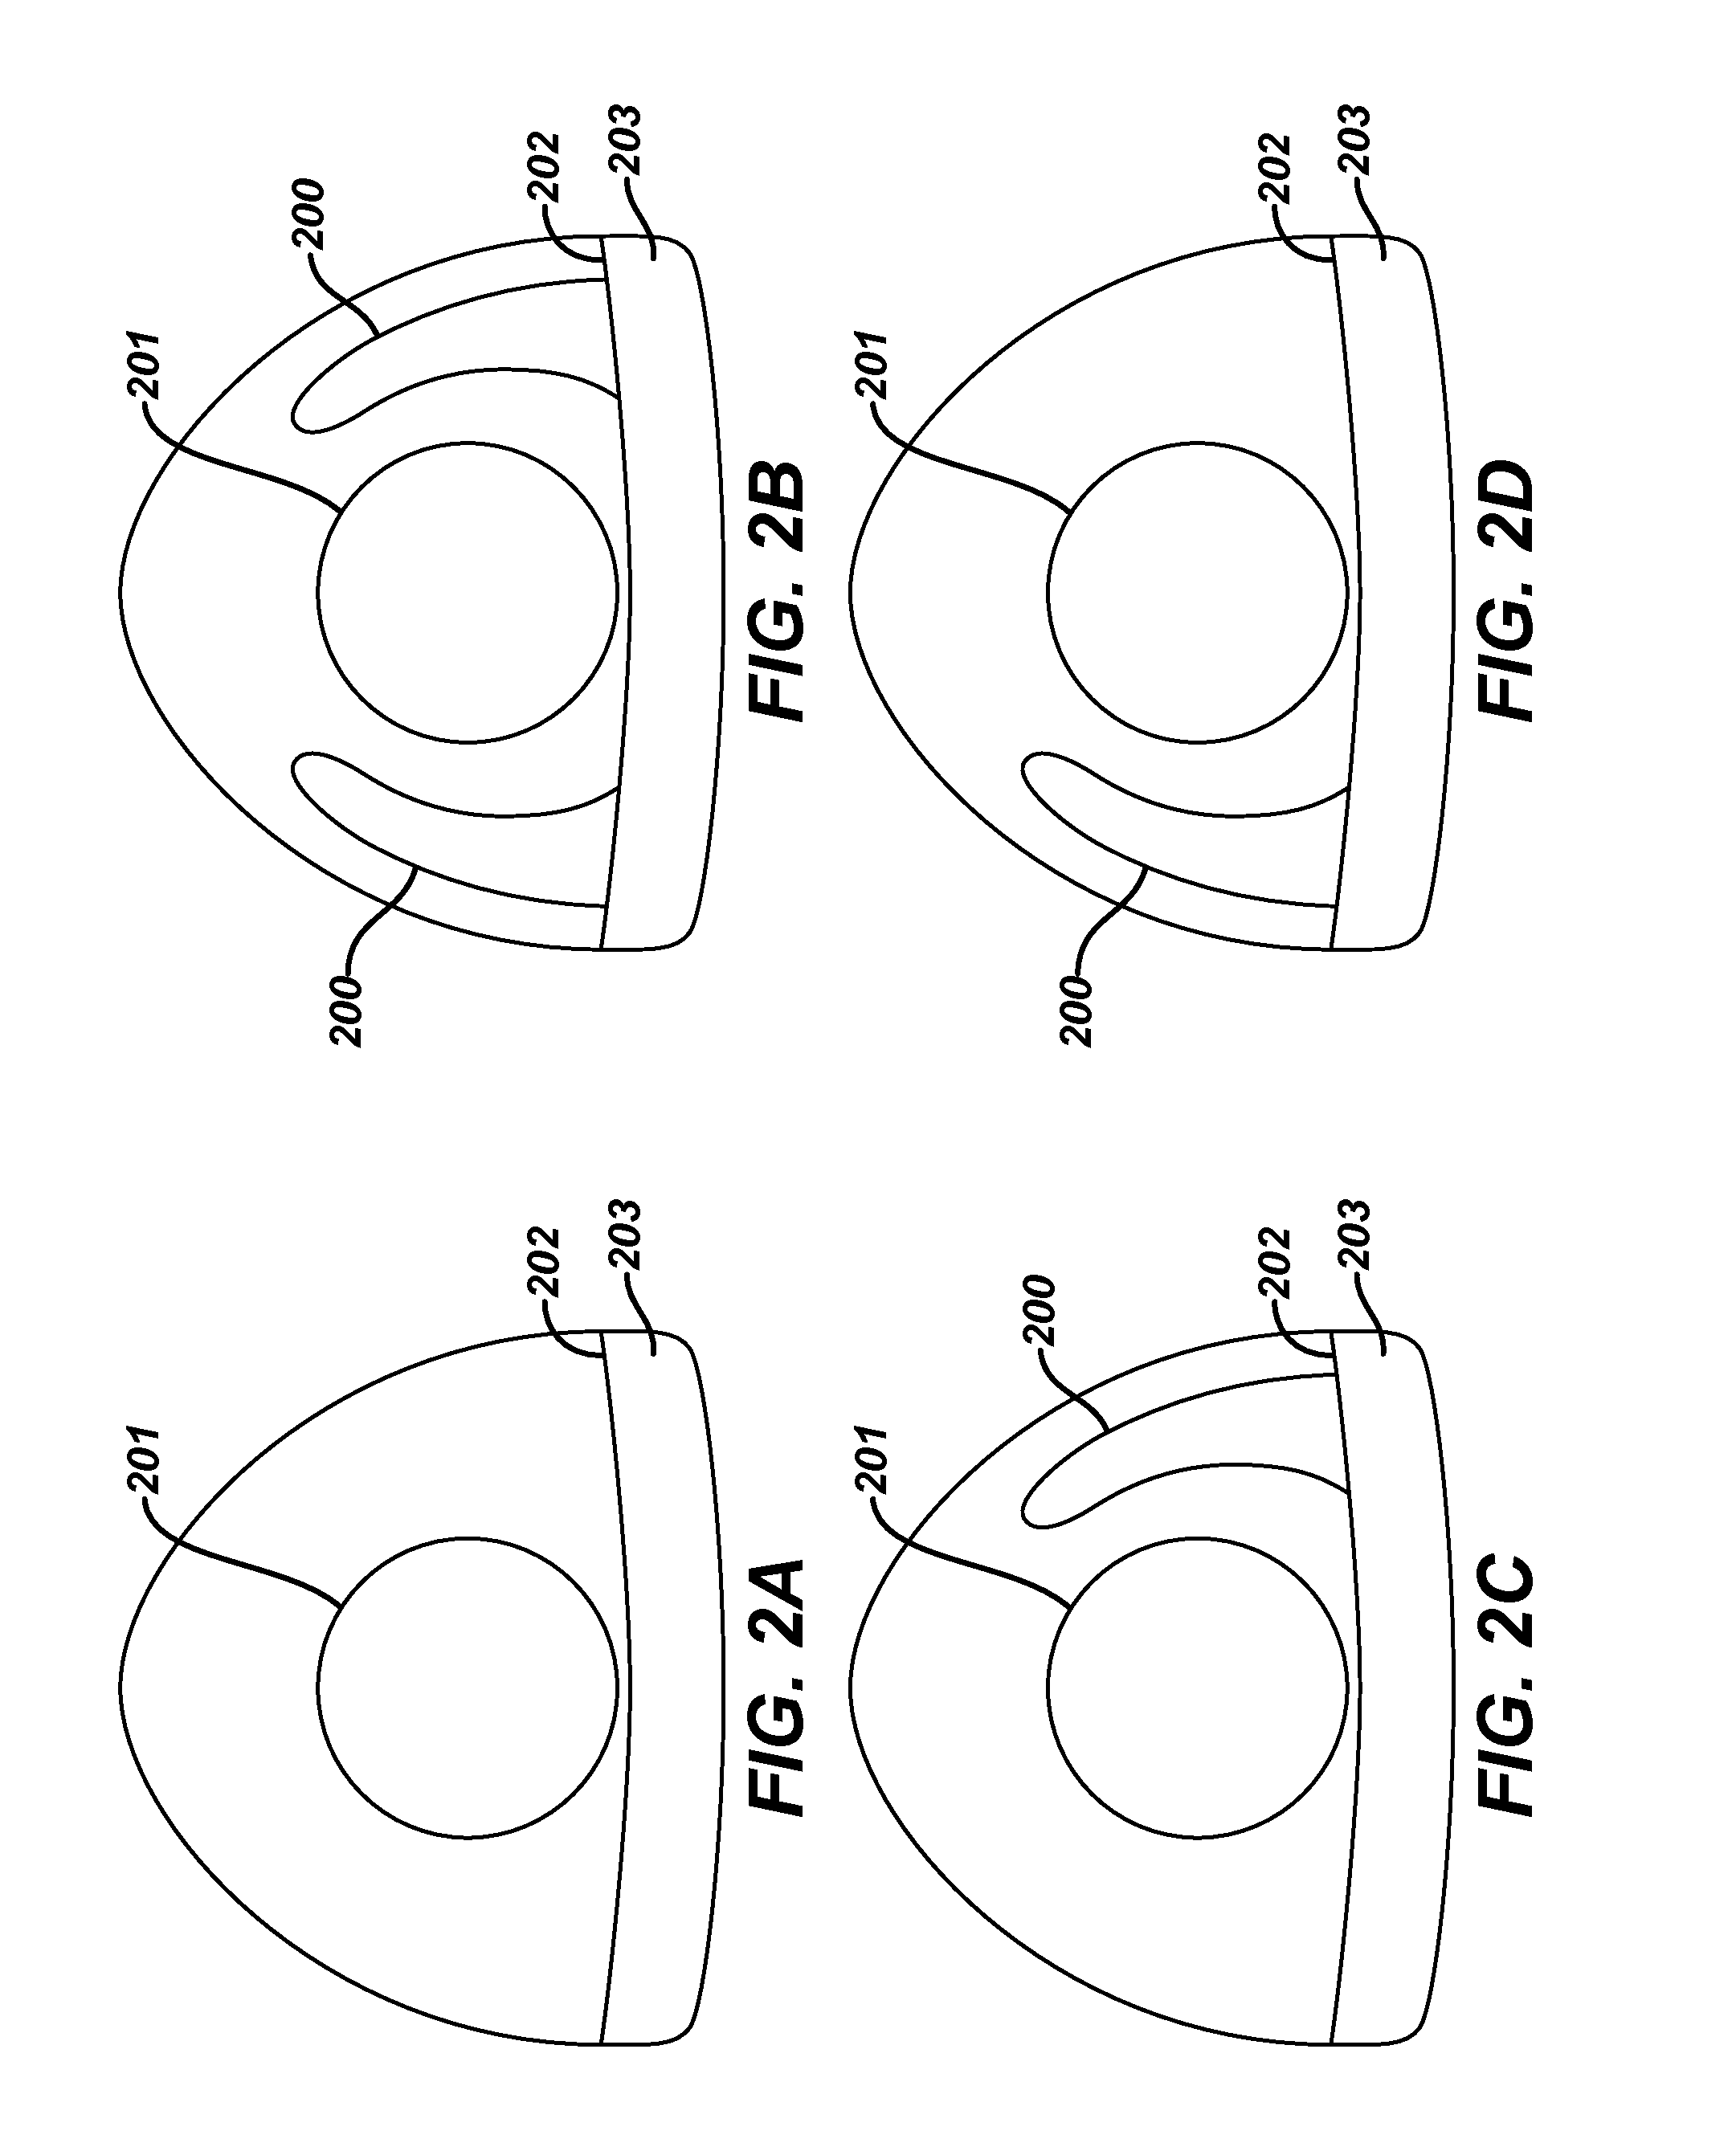 Methods and apparatus for forming a translating multifocal contact lens